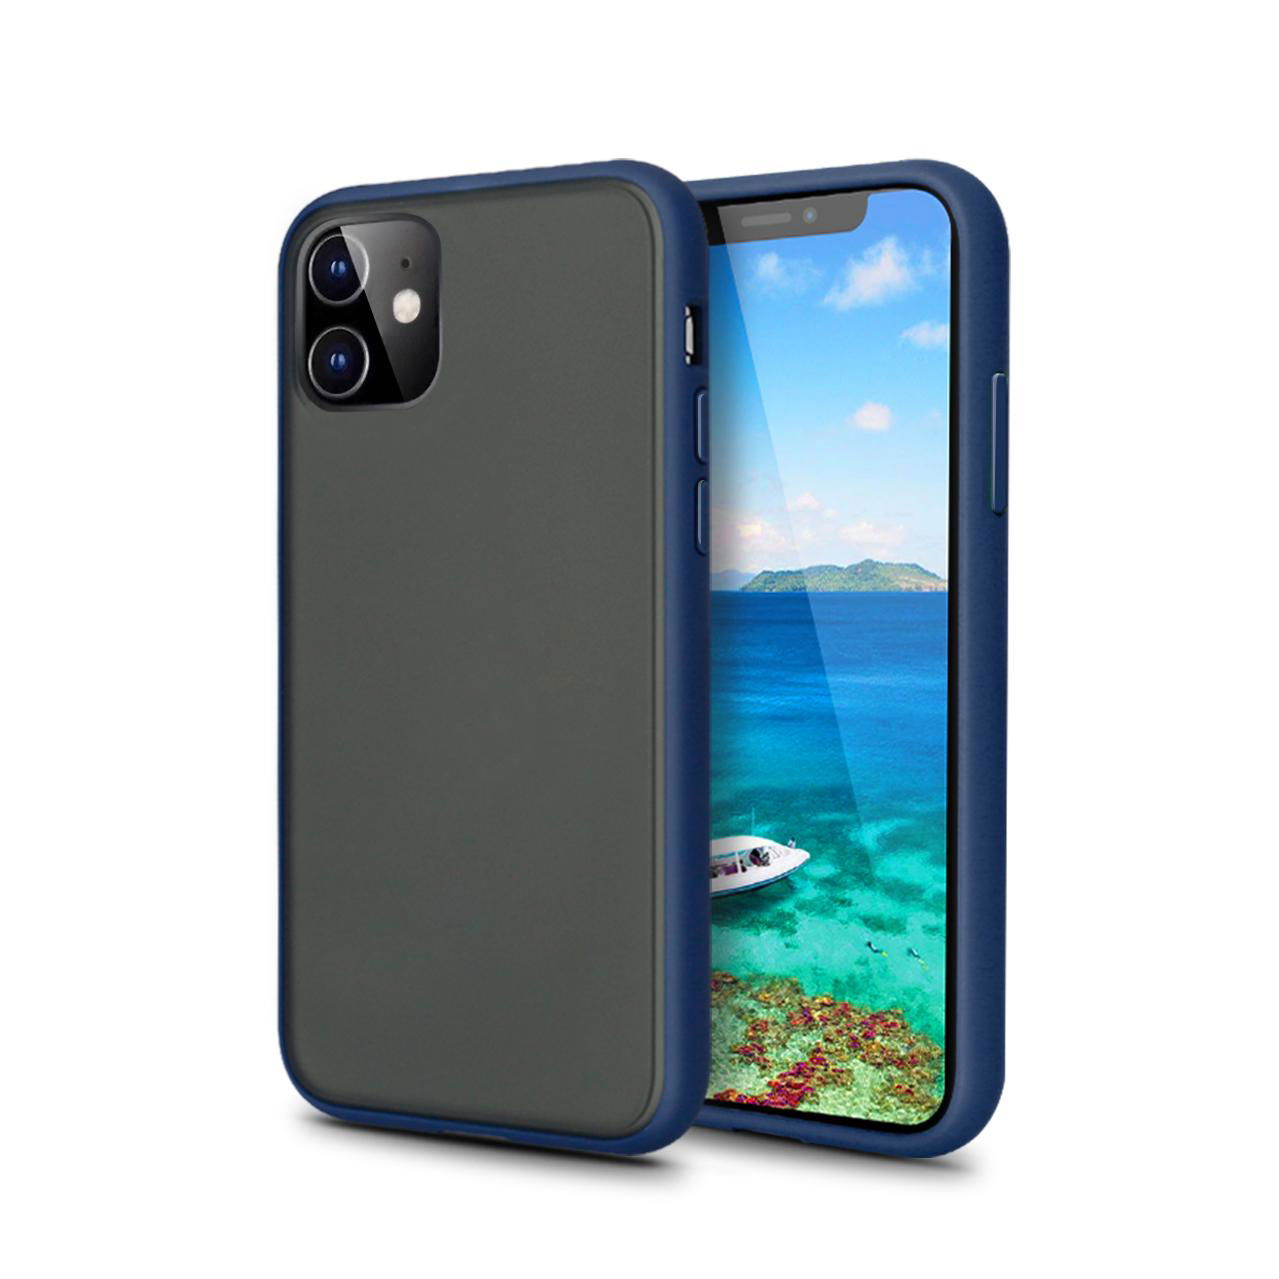  Anti drop Hybrid Phone Case Mobile Phone Cover For iphone 11 Pro Max  4